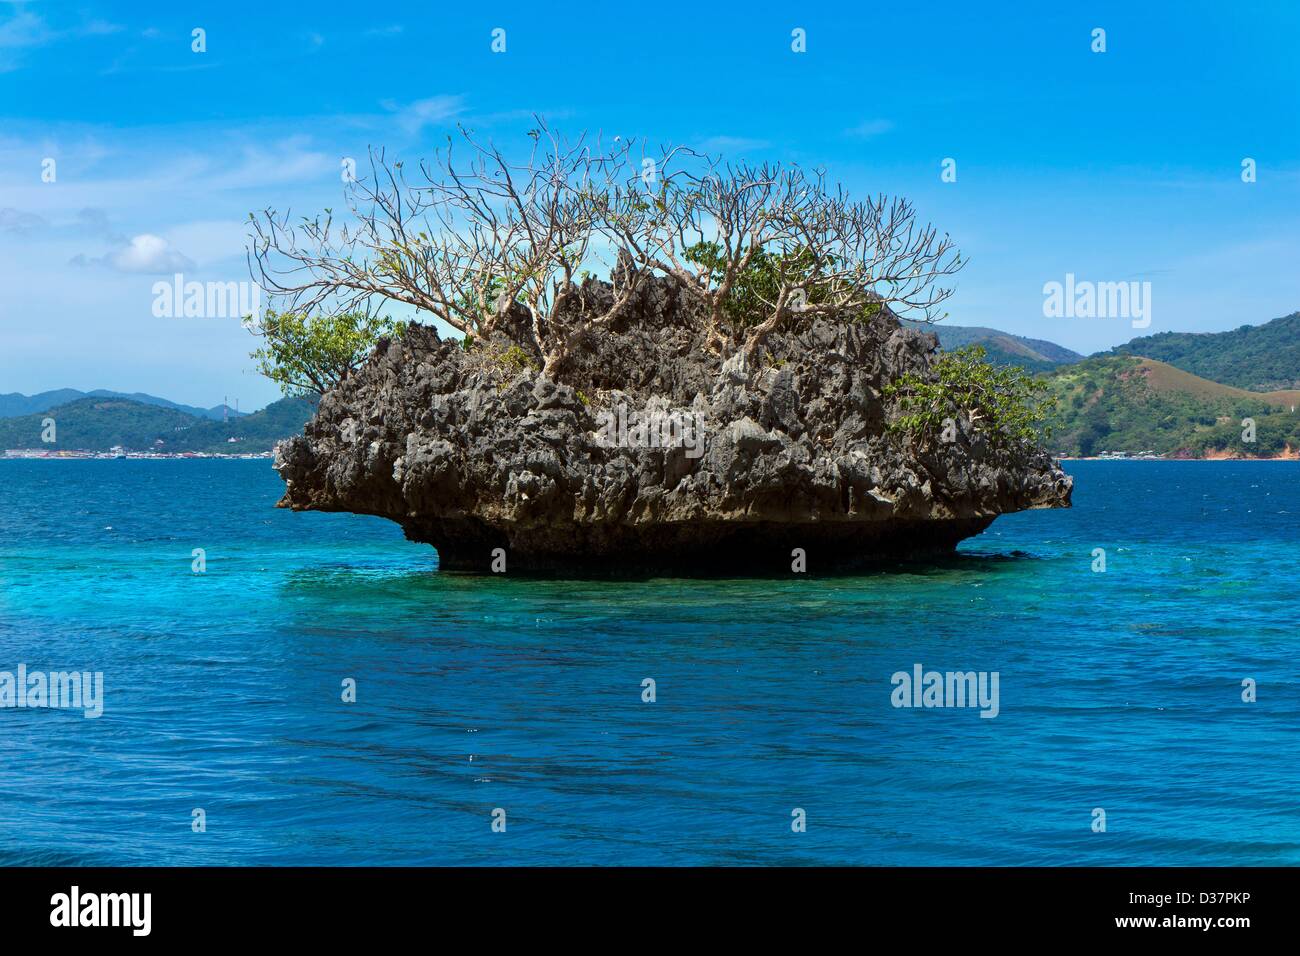 Coral block with trees over water off the island of Coron, nature reserve Balnek, Coron, Palawan, Philippinen, Asia. Stock Photo